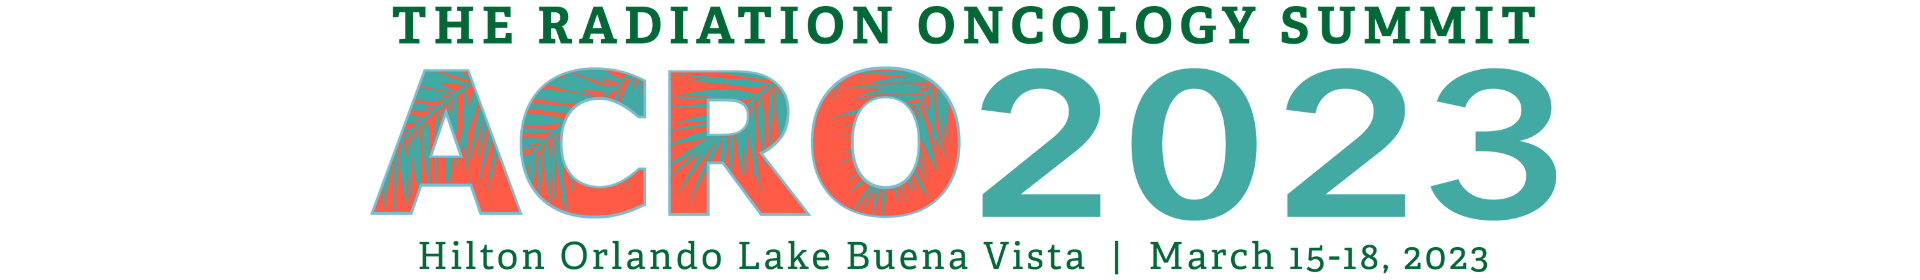 ACRO 2023 Annual Meeting Event Banner